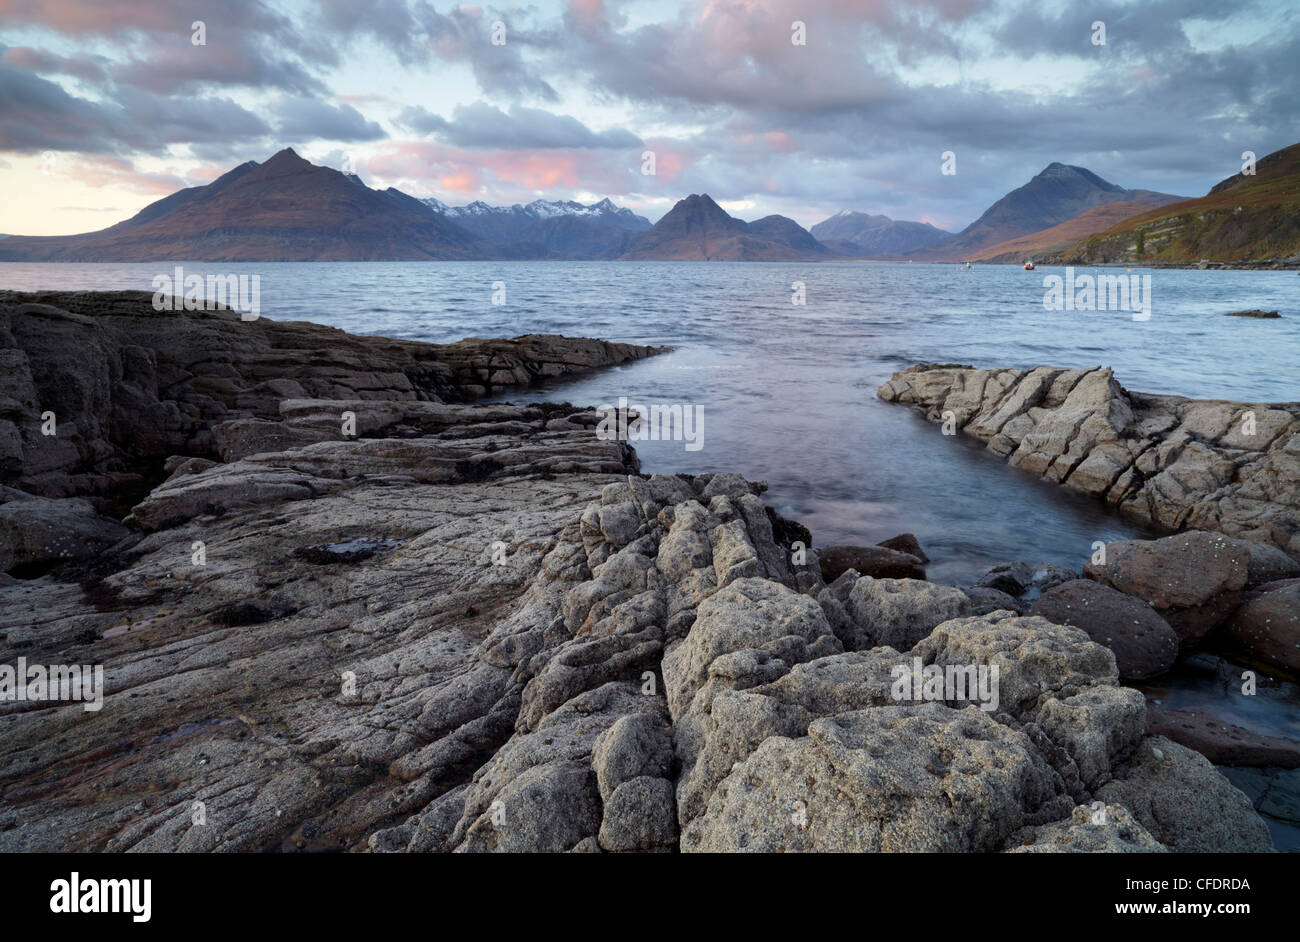 Elgol on the Isle of Skye looking across Loch Scavaig to the Cuillin Mountains, Scotland, United Kingdom, Europe Stock Photo